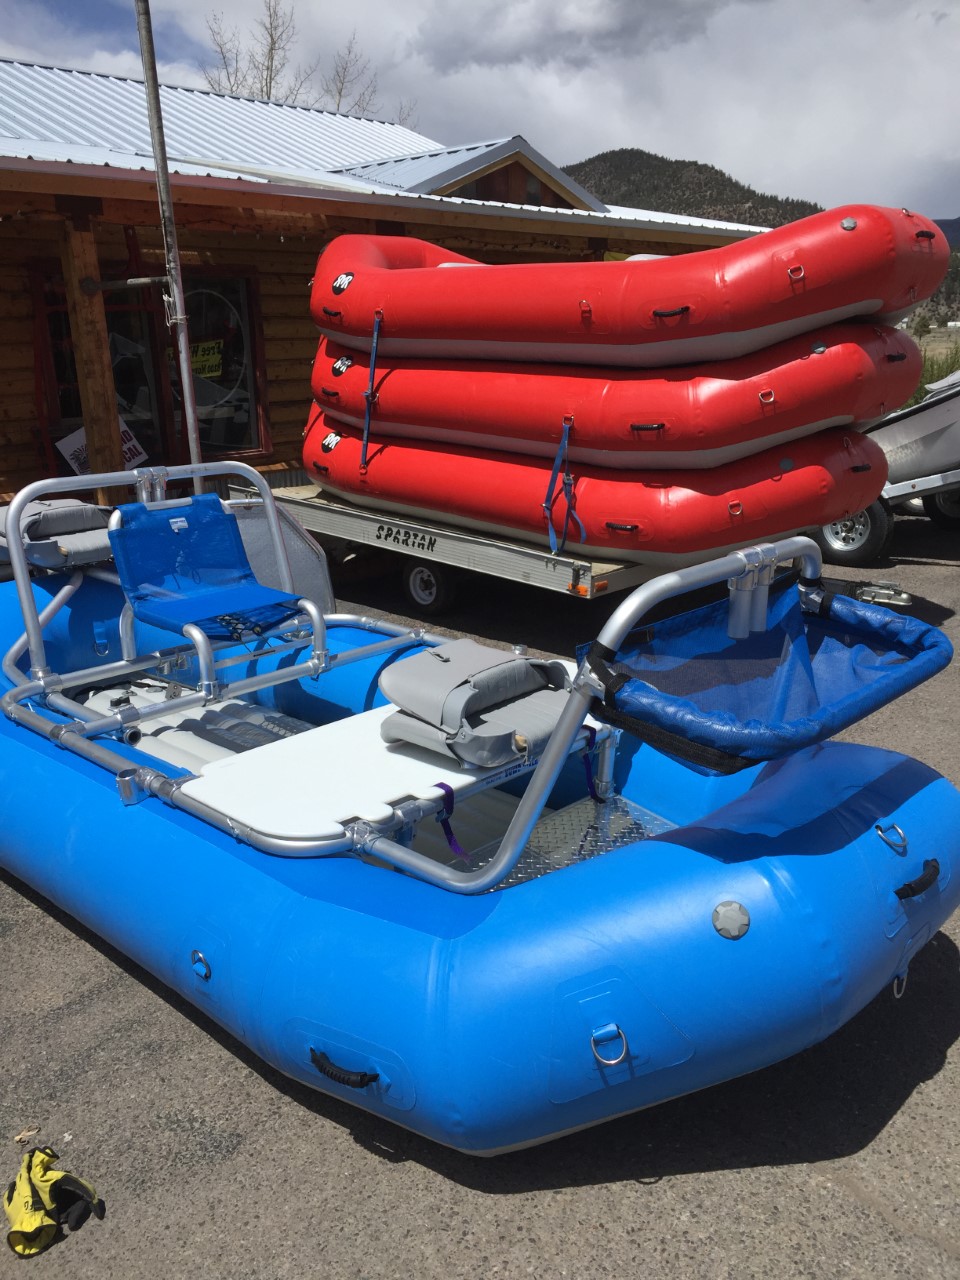 The drift boat raffle sold out - but you can still enter to win